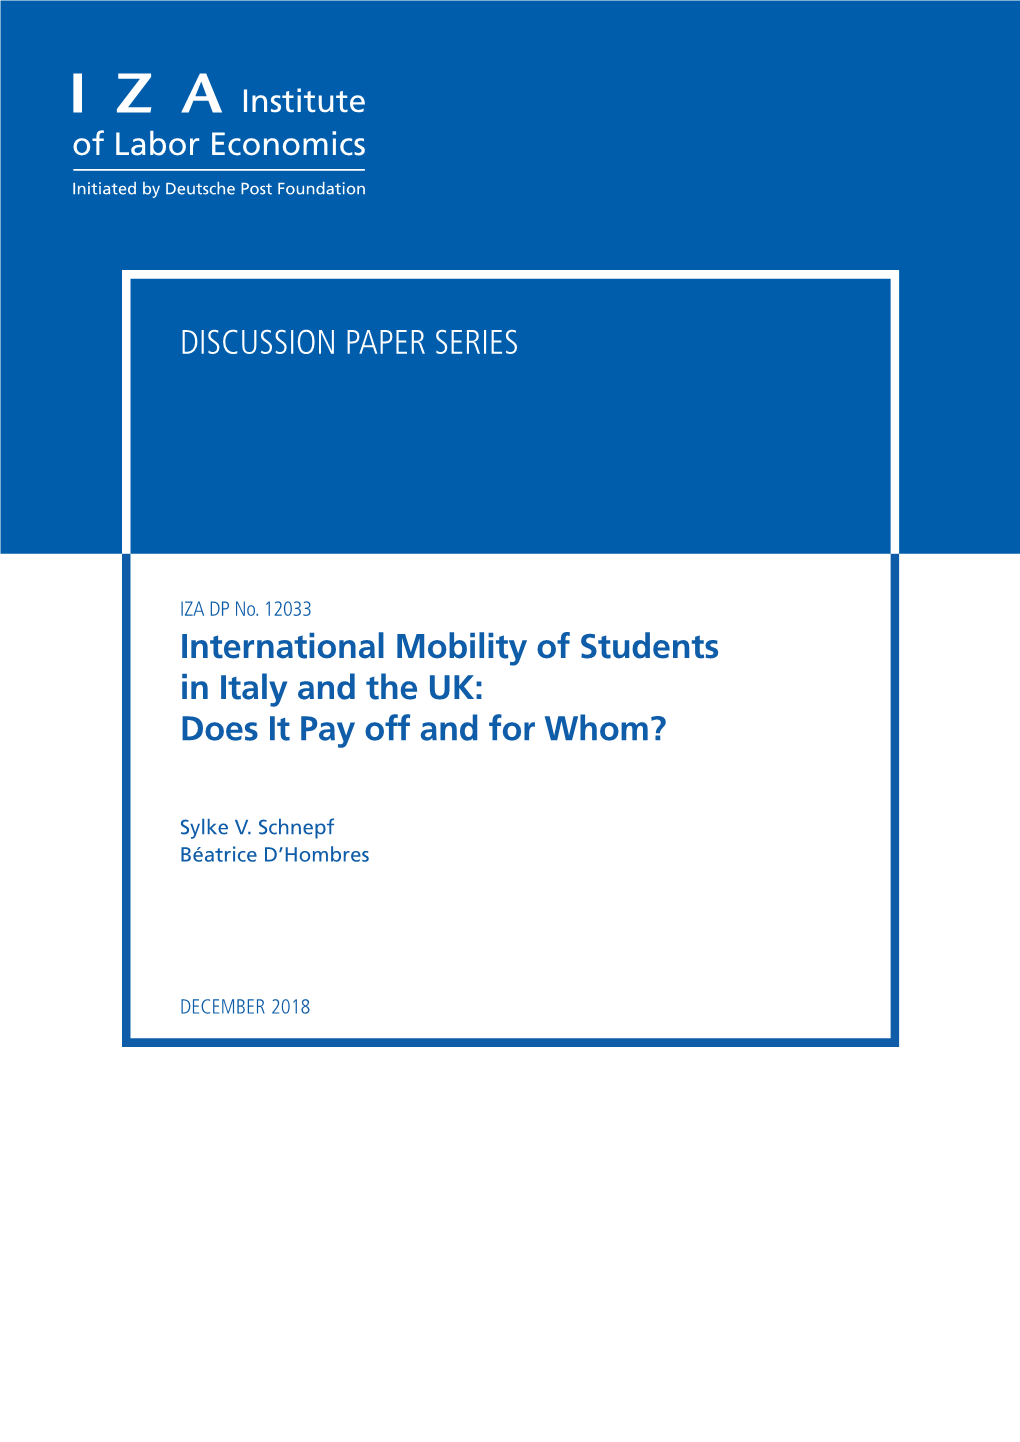 International Mobility of Students in Italy and the UK: Does It Pay Off and for Whom?